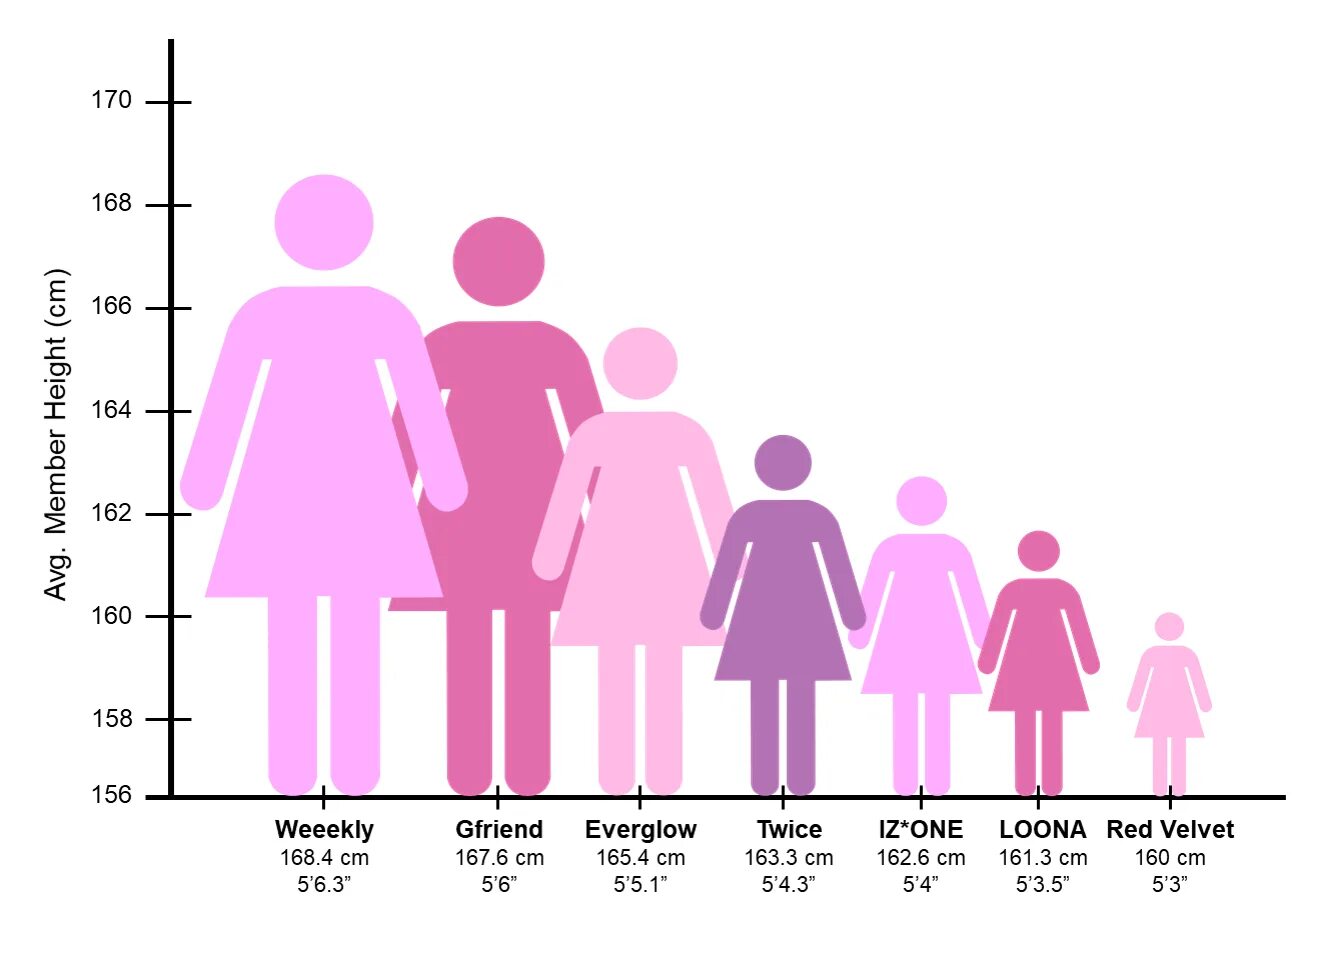 Height load. Ive рост. Average height. 5'6 In cm height. Average female height.